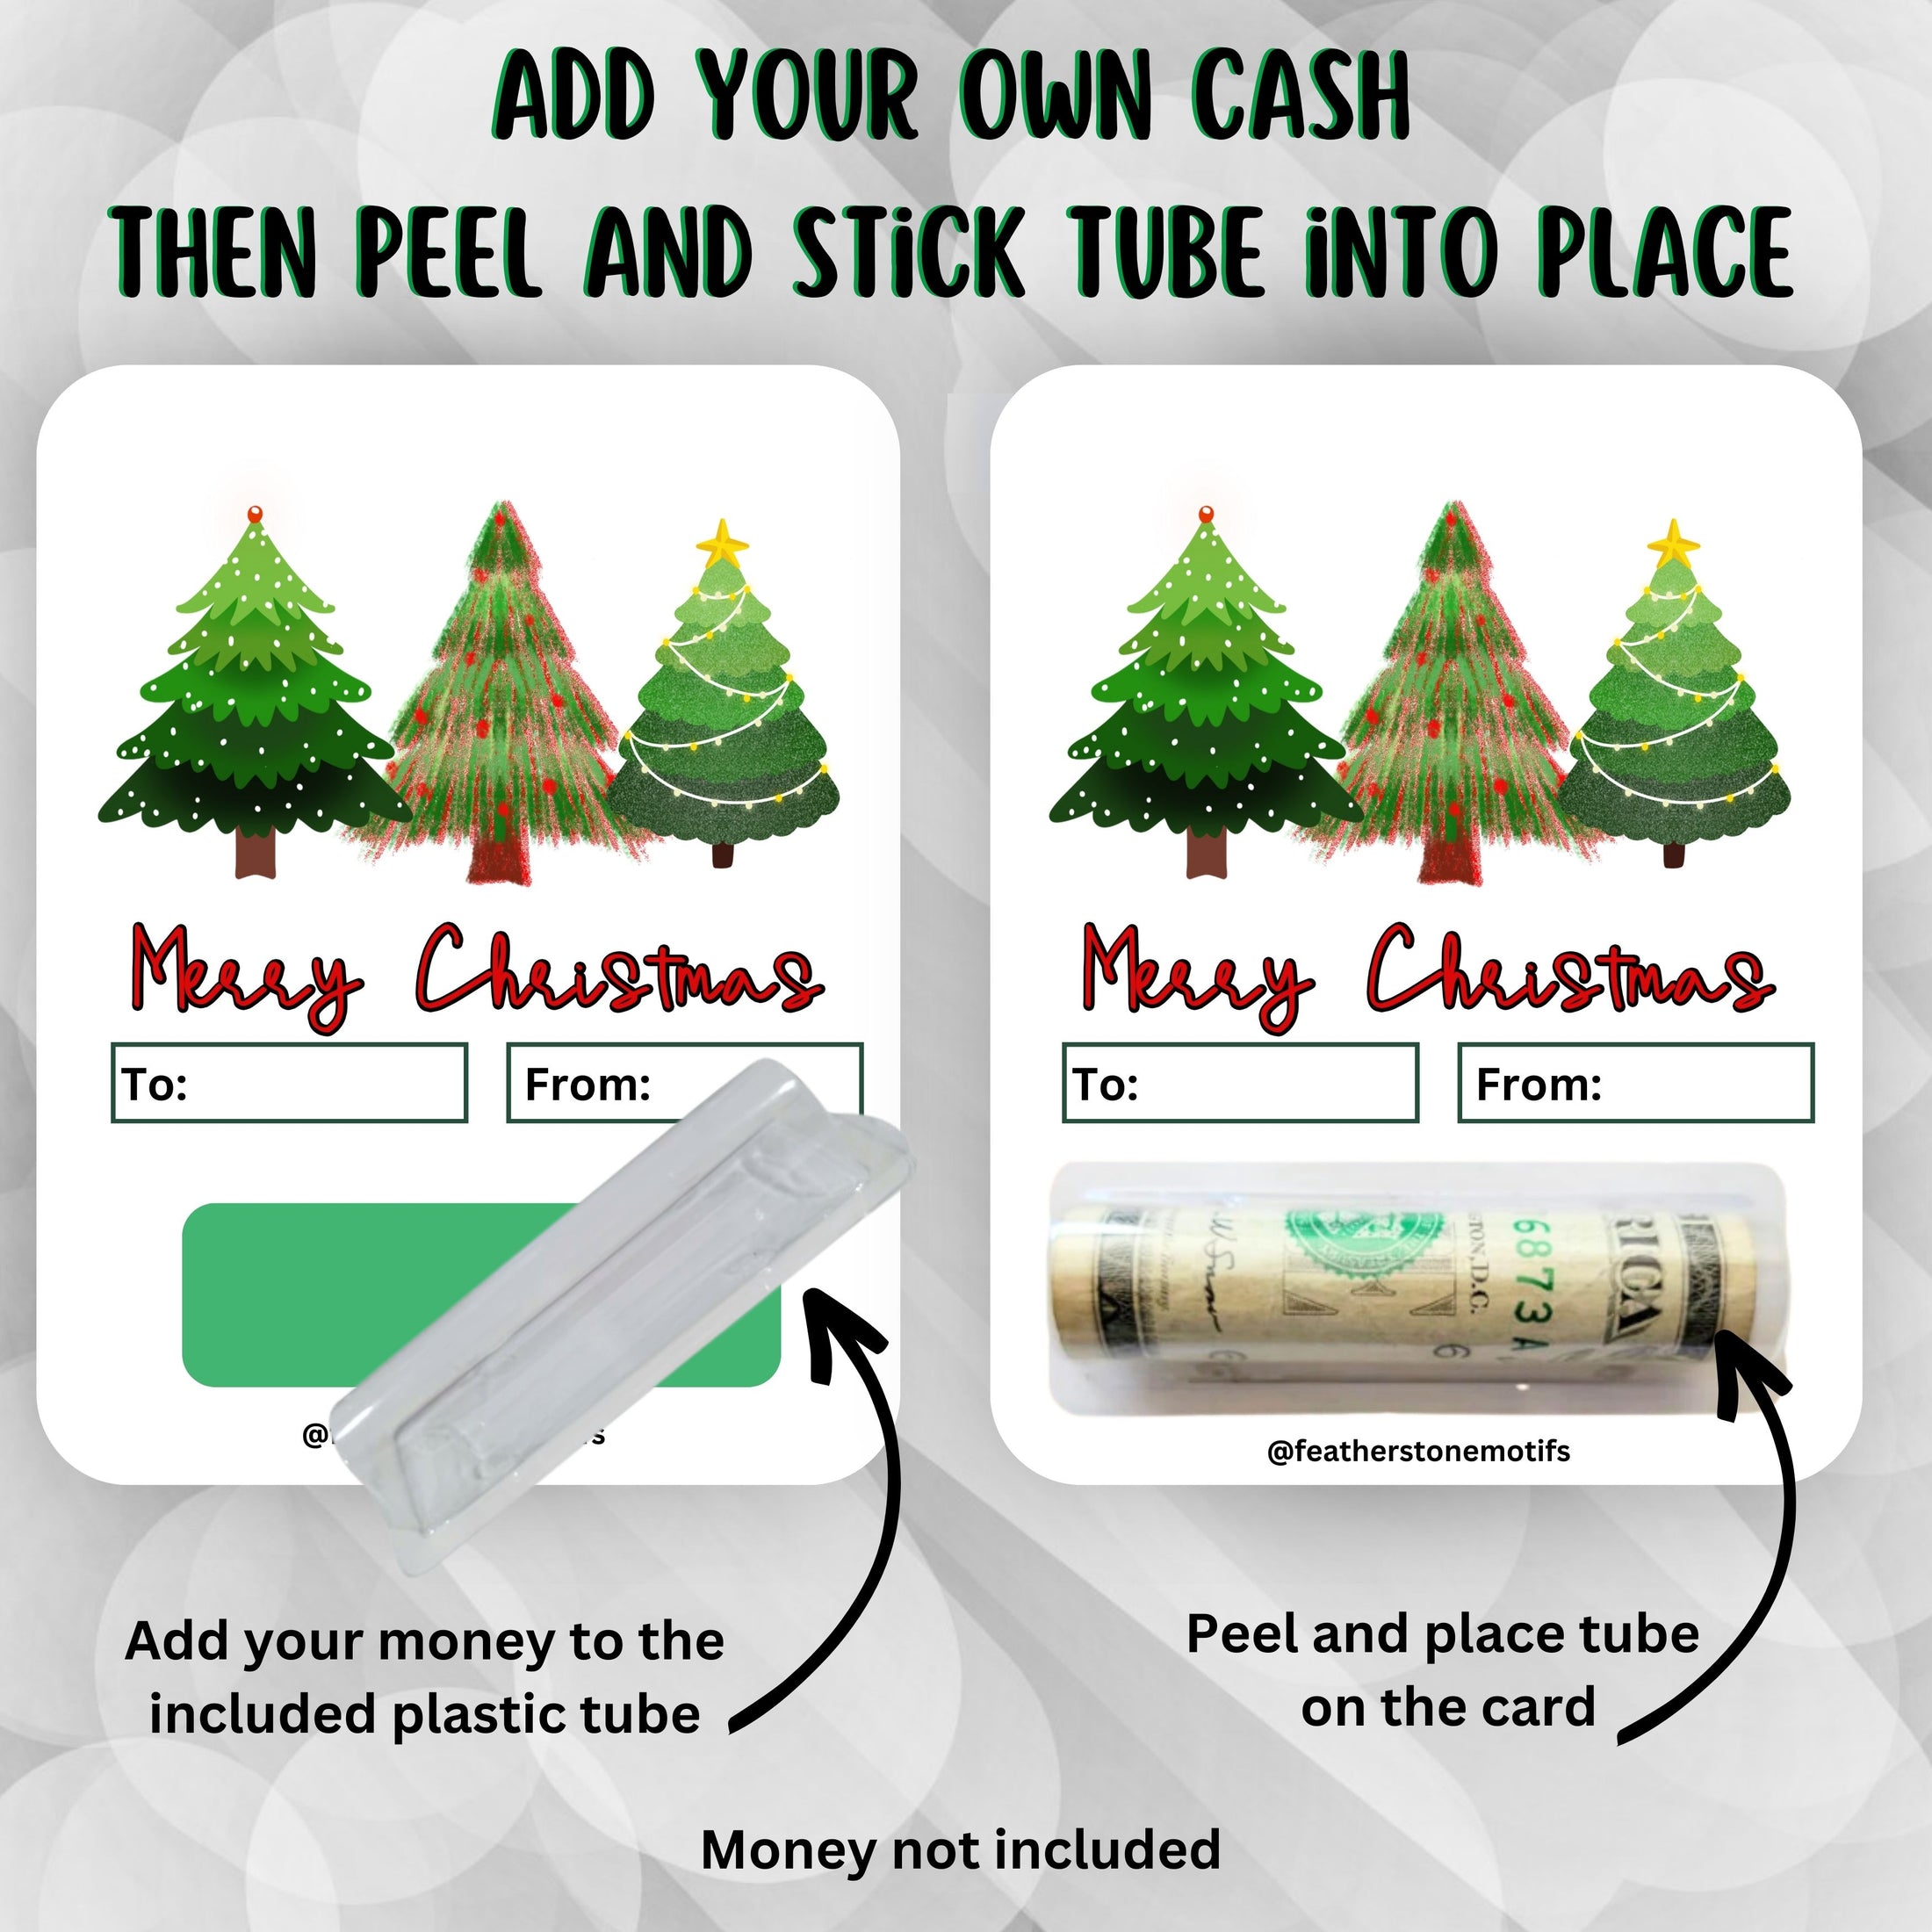 This image shows how to attach the money tube to the Christmas Trees Money Card.